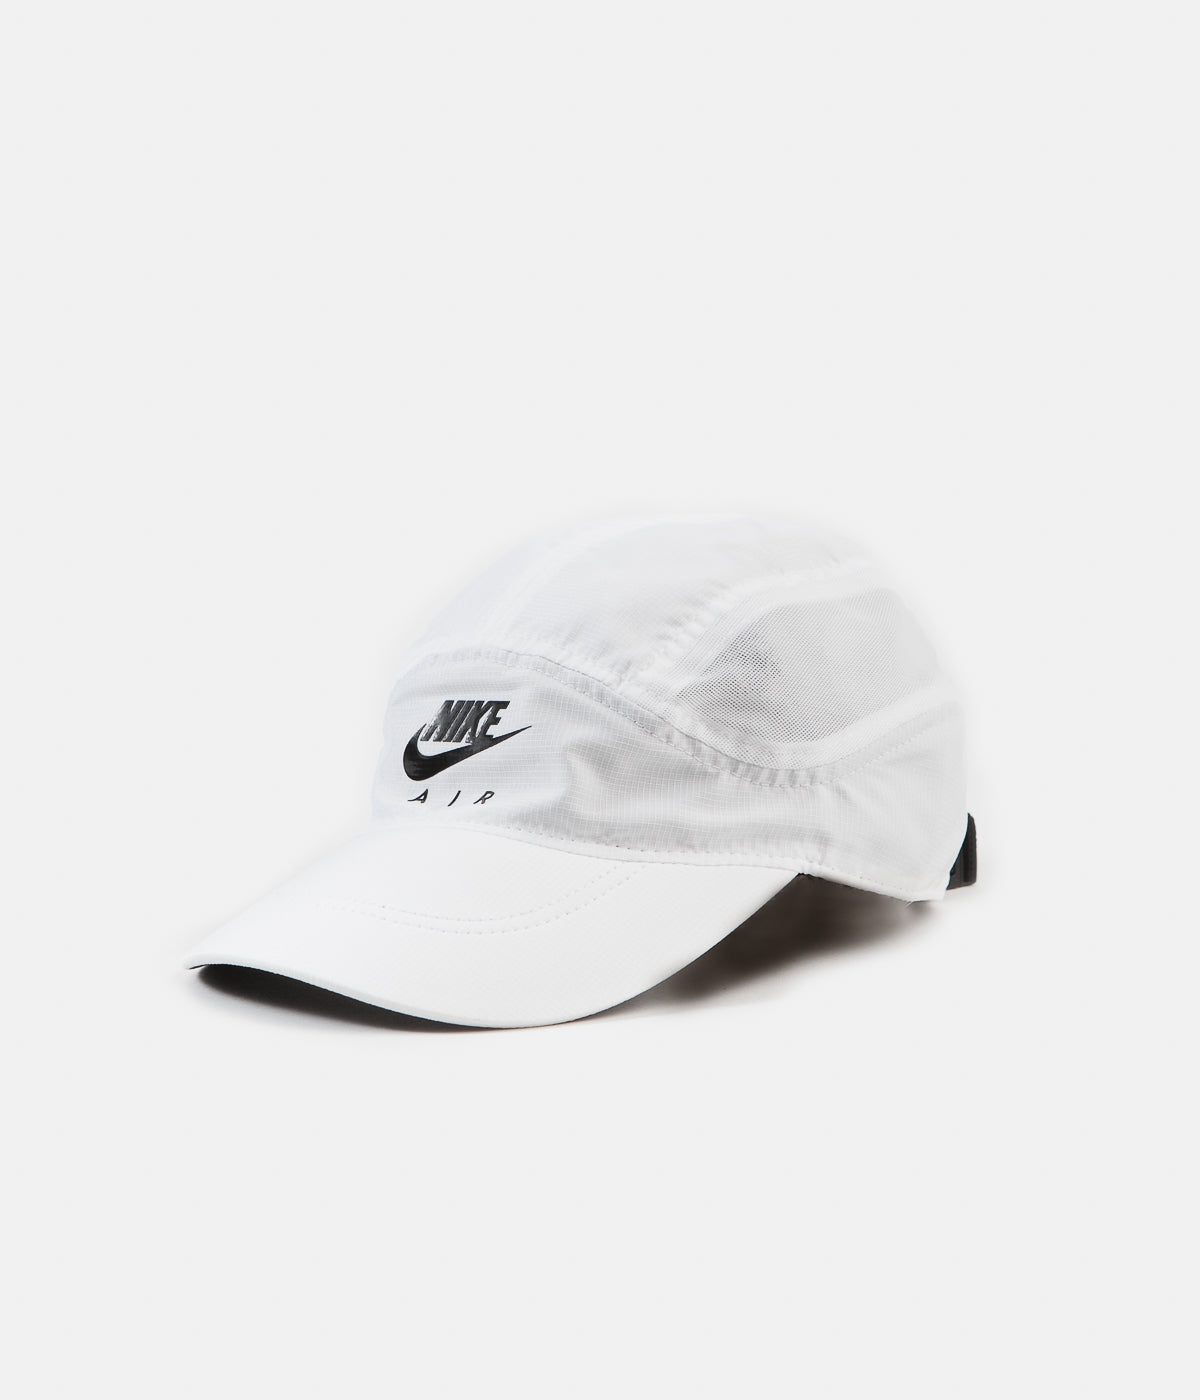 Minachting Afrika kant Nike Air Tailwind Cap - White | Always in Colour